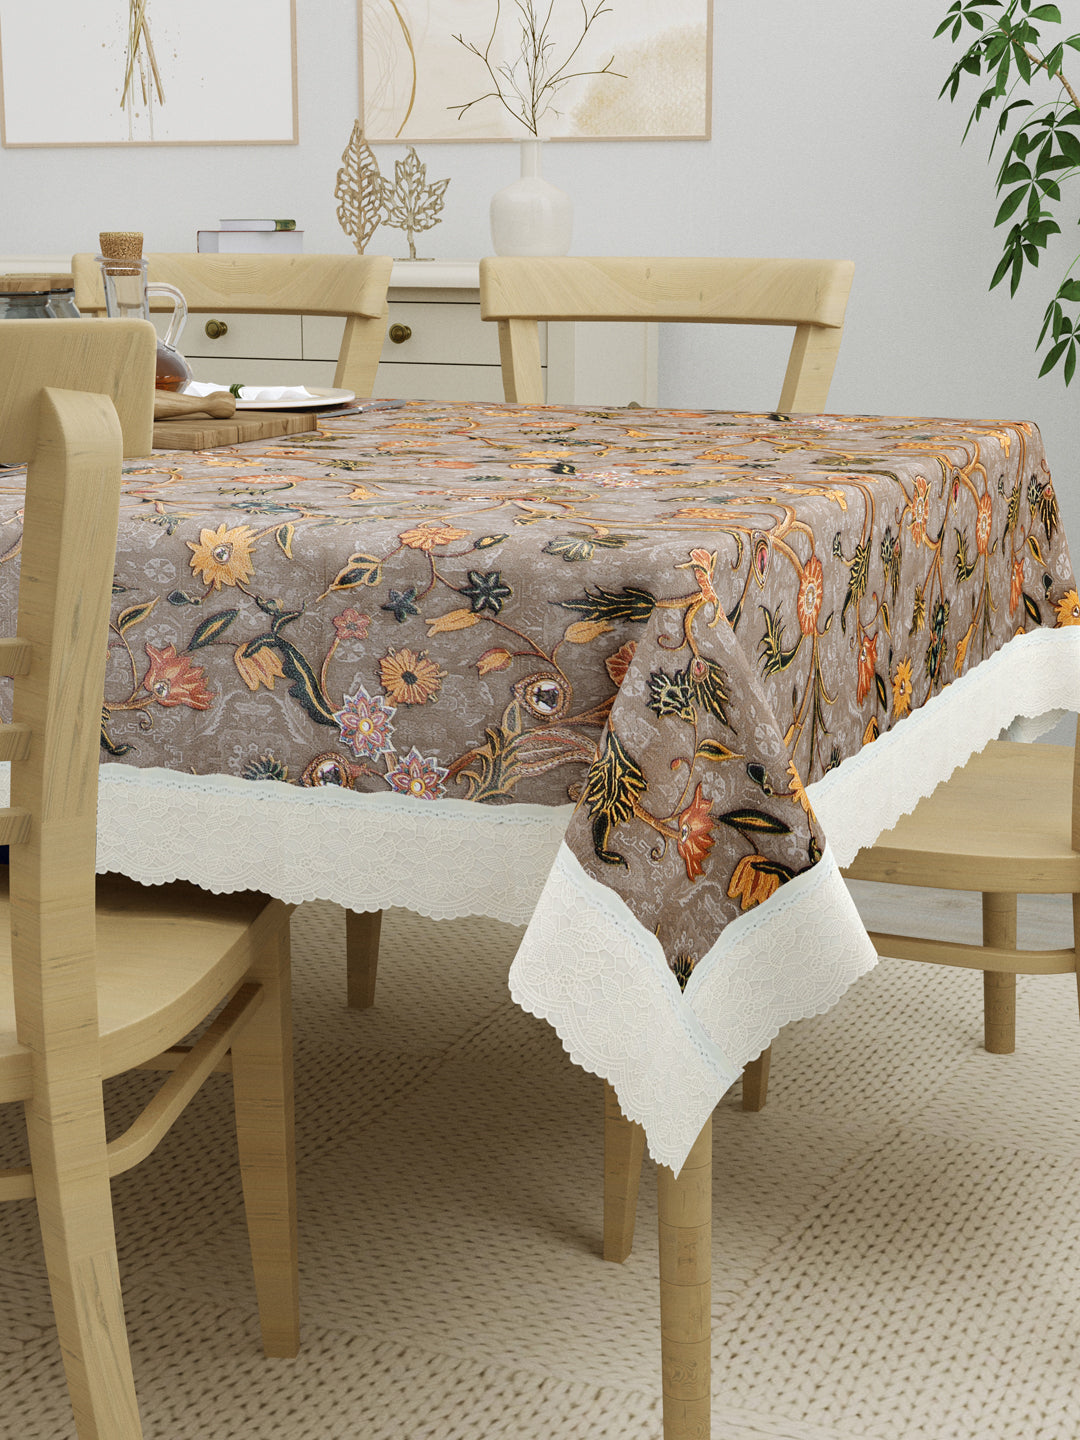 6 Seater Dining Table Cover; Material - PVC; Anti Slip; Golden Yellow Flowers